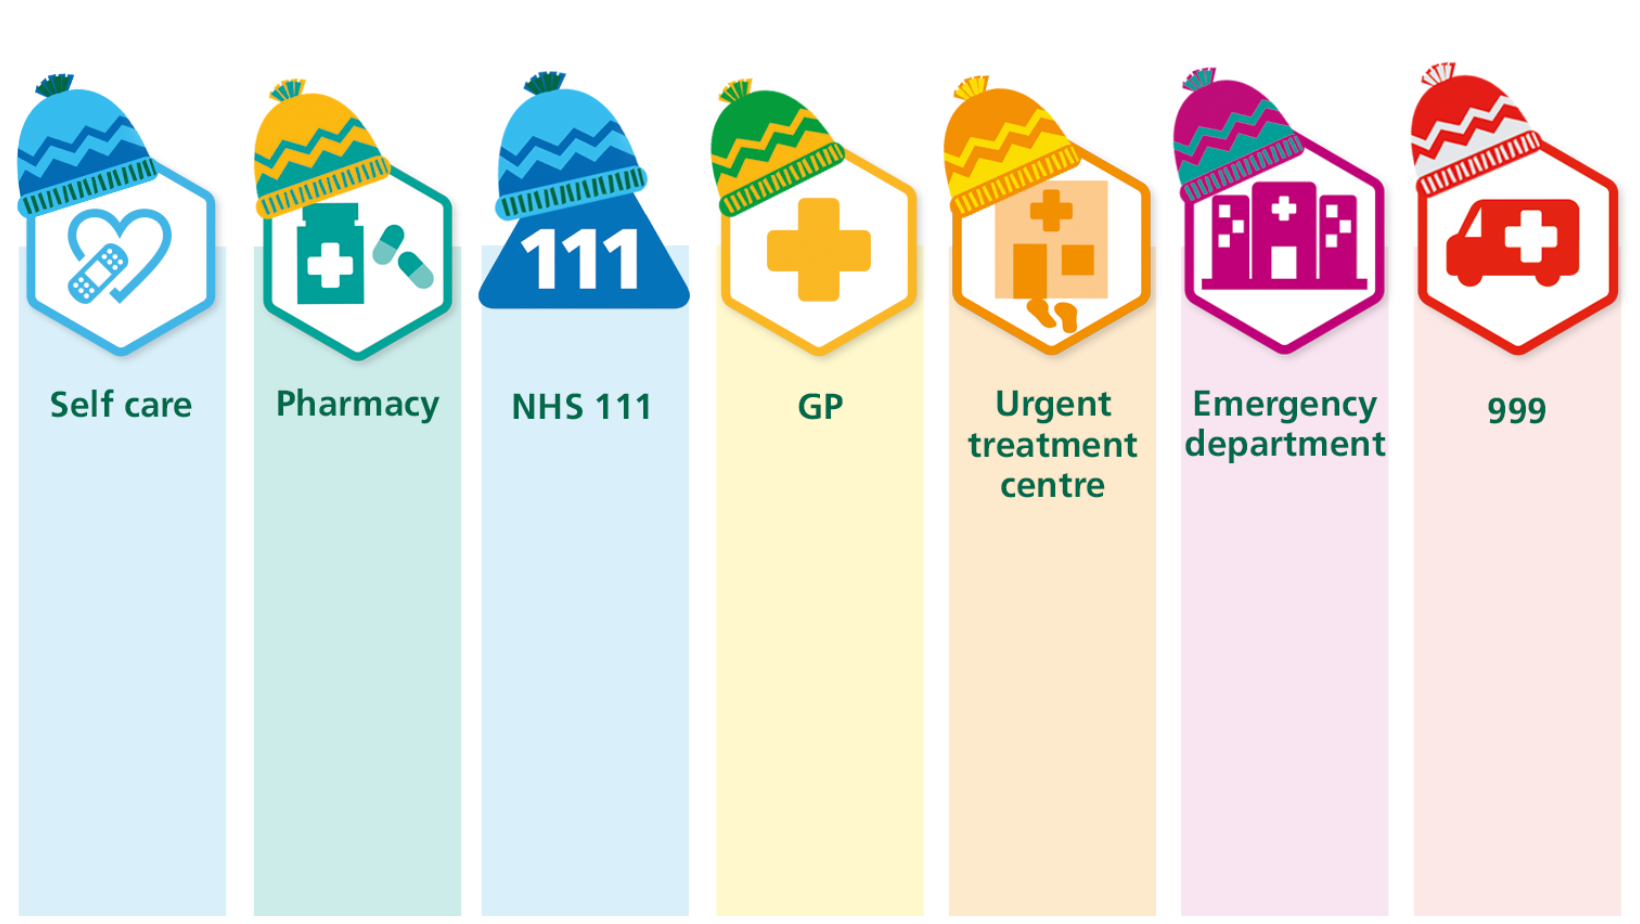 Diagram asking people to choose the appropriate NHS service according to their need